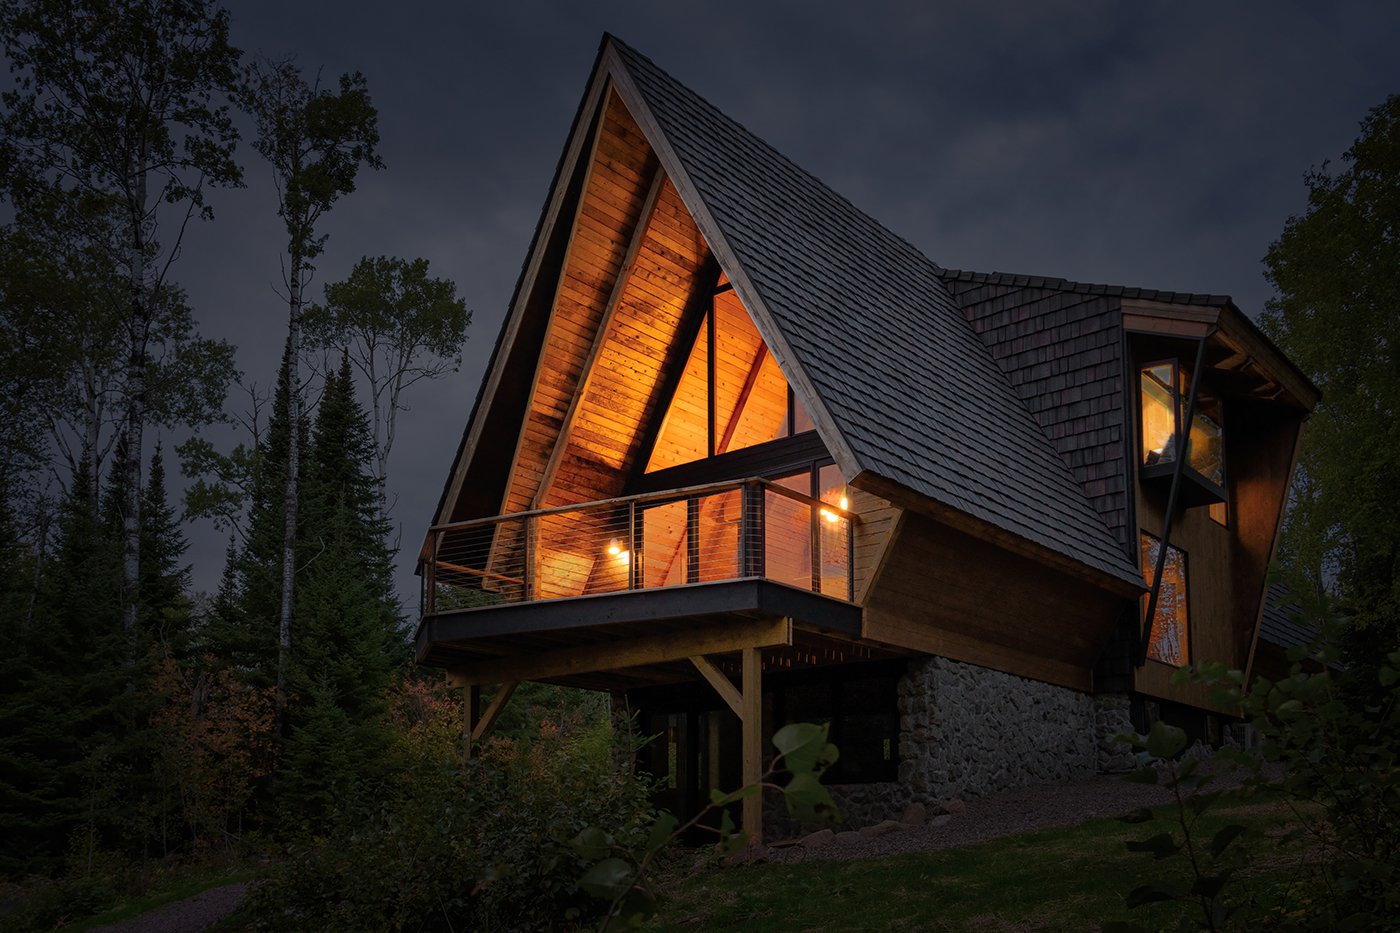 The Minne Stuga A-Frame Cabin at Night, featuring Marvin Ultimate windows and doors, Skycove and Awaken Skylights.